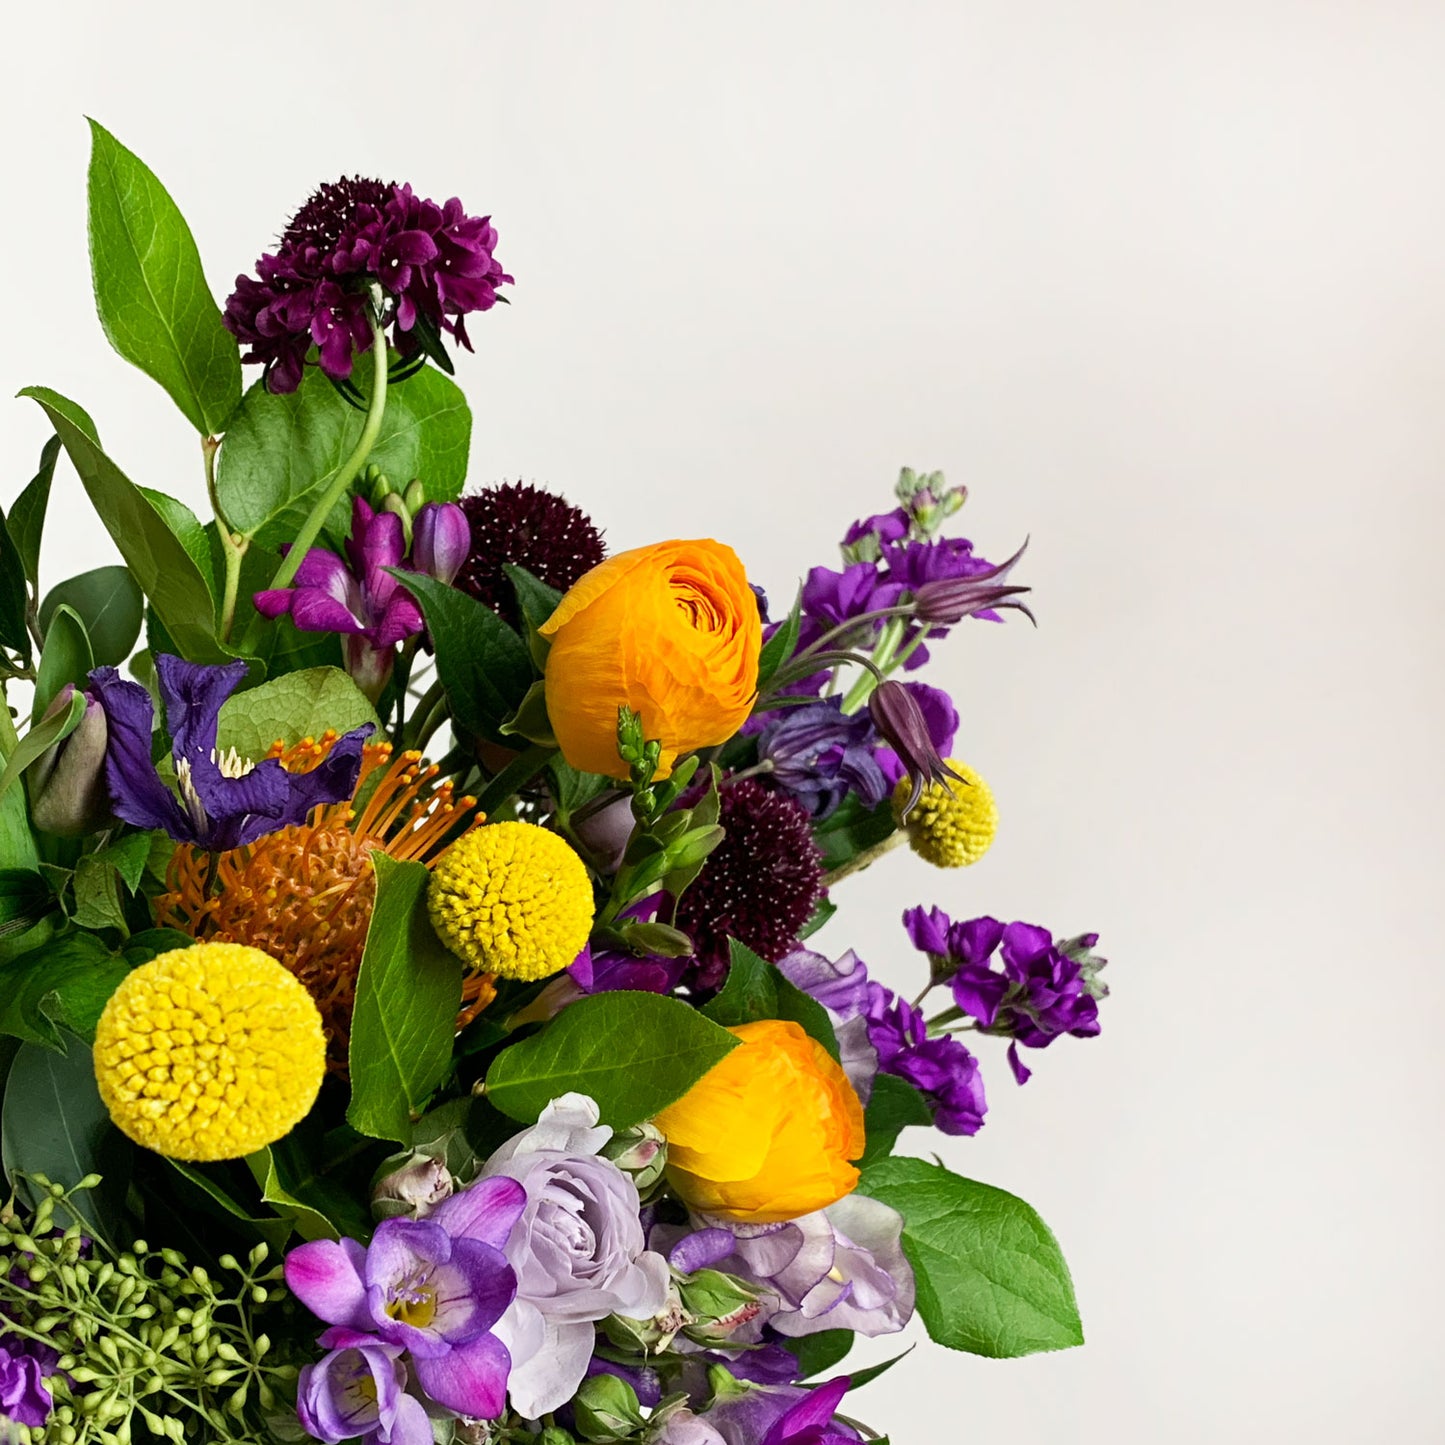 Load image into Gallery viewer, Close-up image of a dynamic bouquet starting with yellows, deepening to purple and mauve, with a touch of acid orange for energy. Order online for same-day flower delivery from Toronto&amp;#39;s best florist, available near you.
